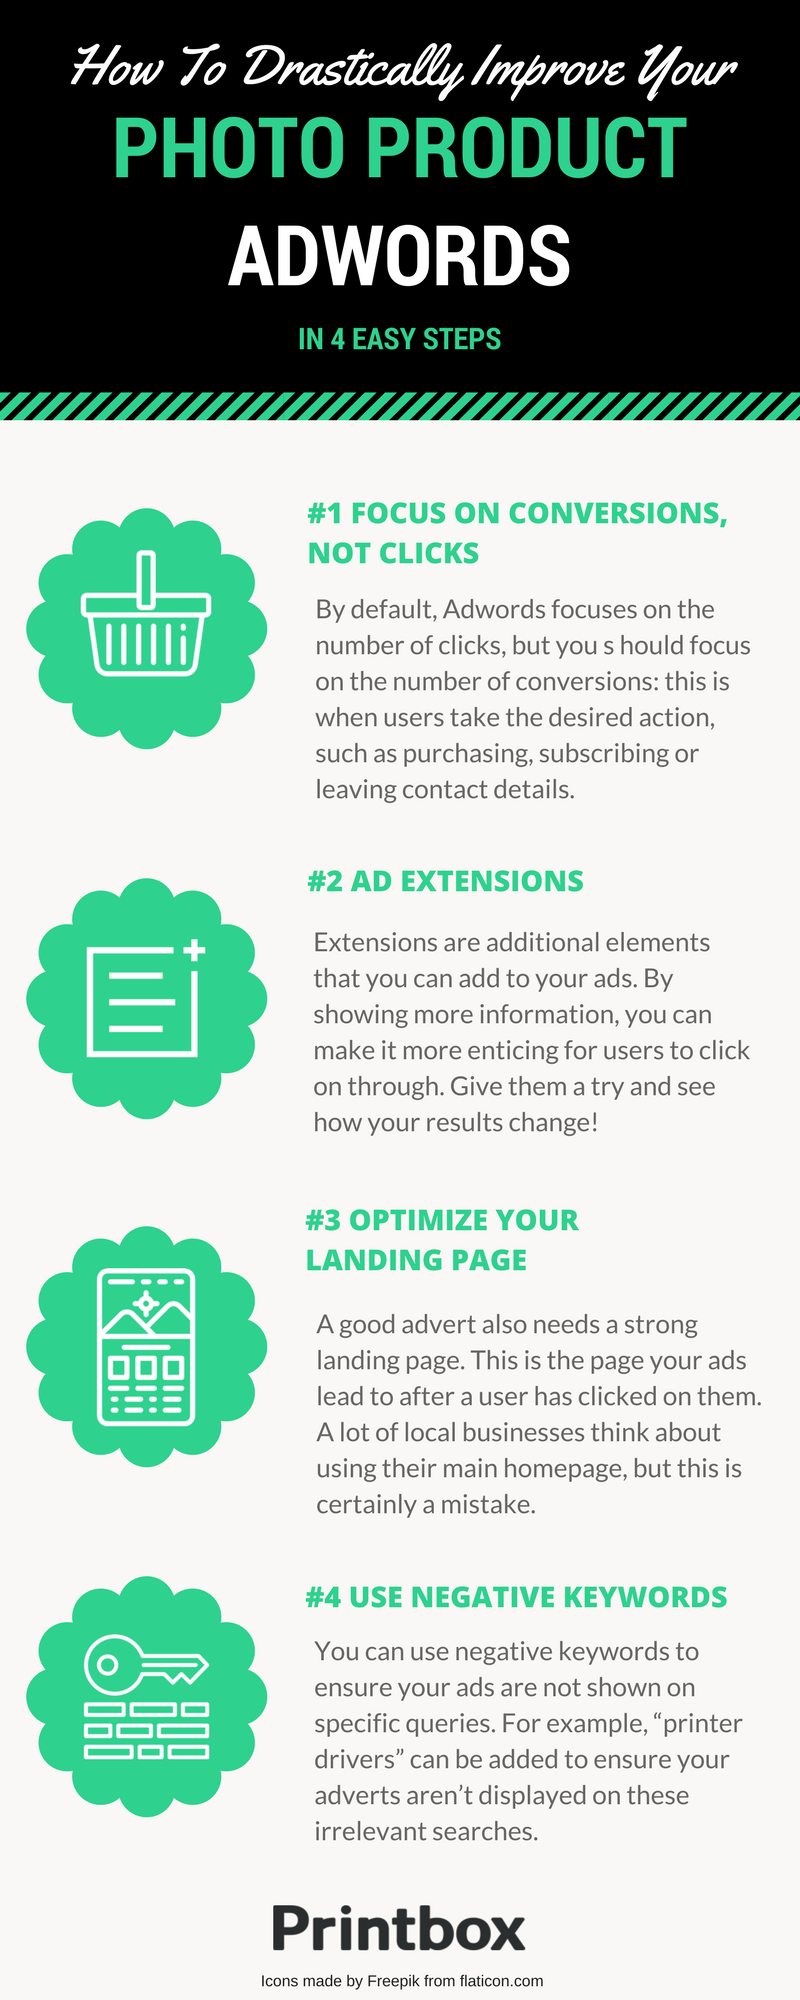 How to drastically improve your photo product adwords (1)